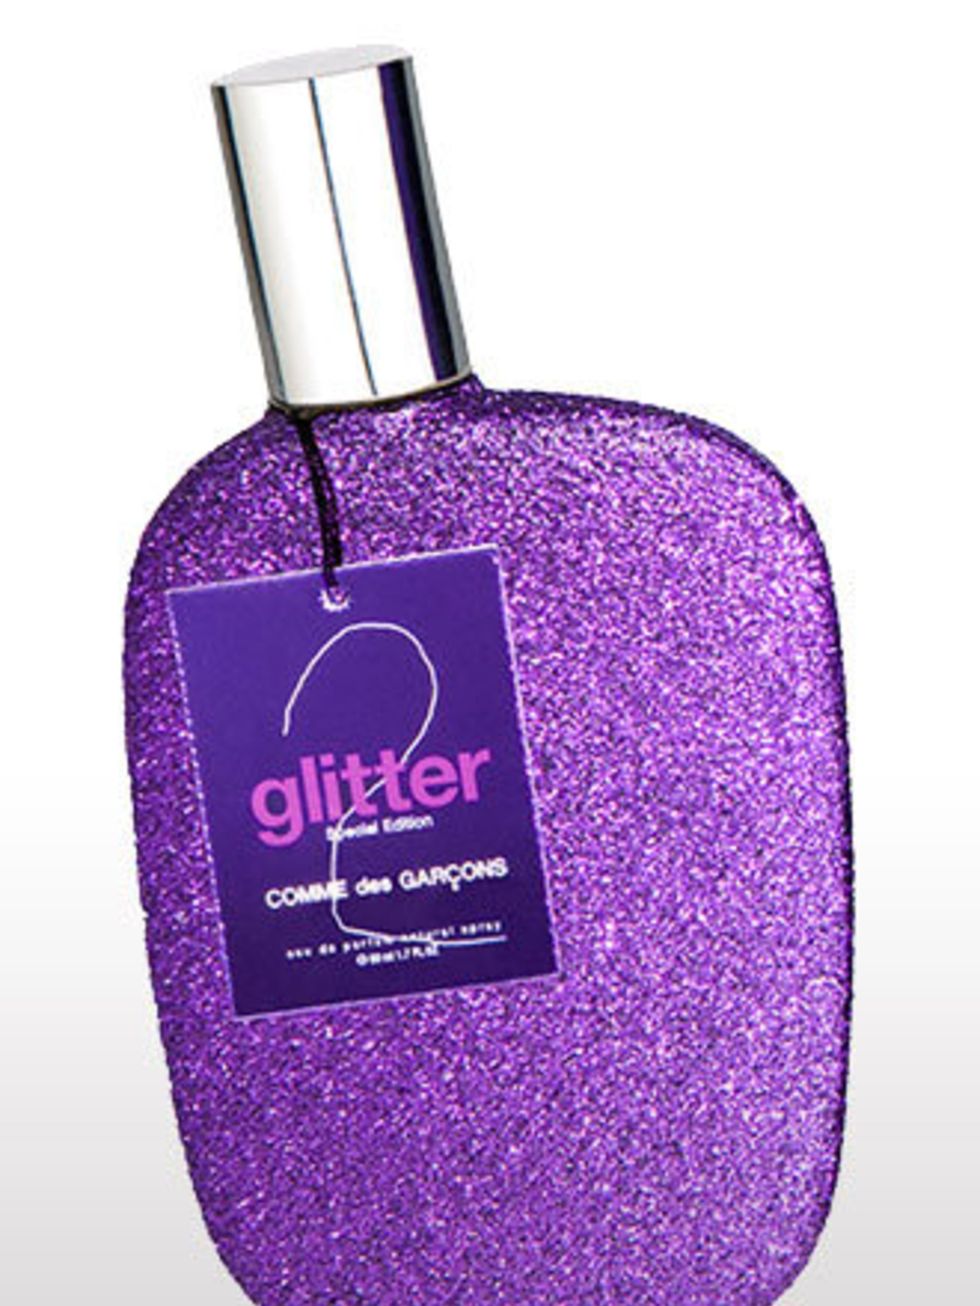 <p>They say never judge a book by its cover but we want this perfume just for the Limited Edition glittery bottle. With amber and cedarwood, it has a distinct incense hint to it. Definitely for outgoing types. </p><p> Glitter 2, £44 for 50ml EDP, by COM